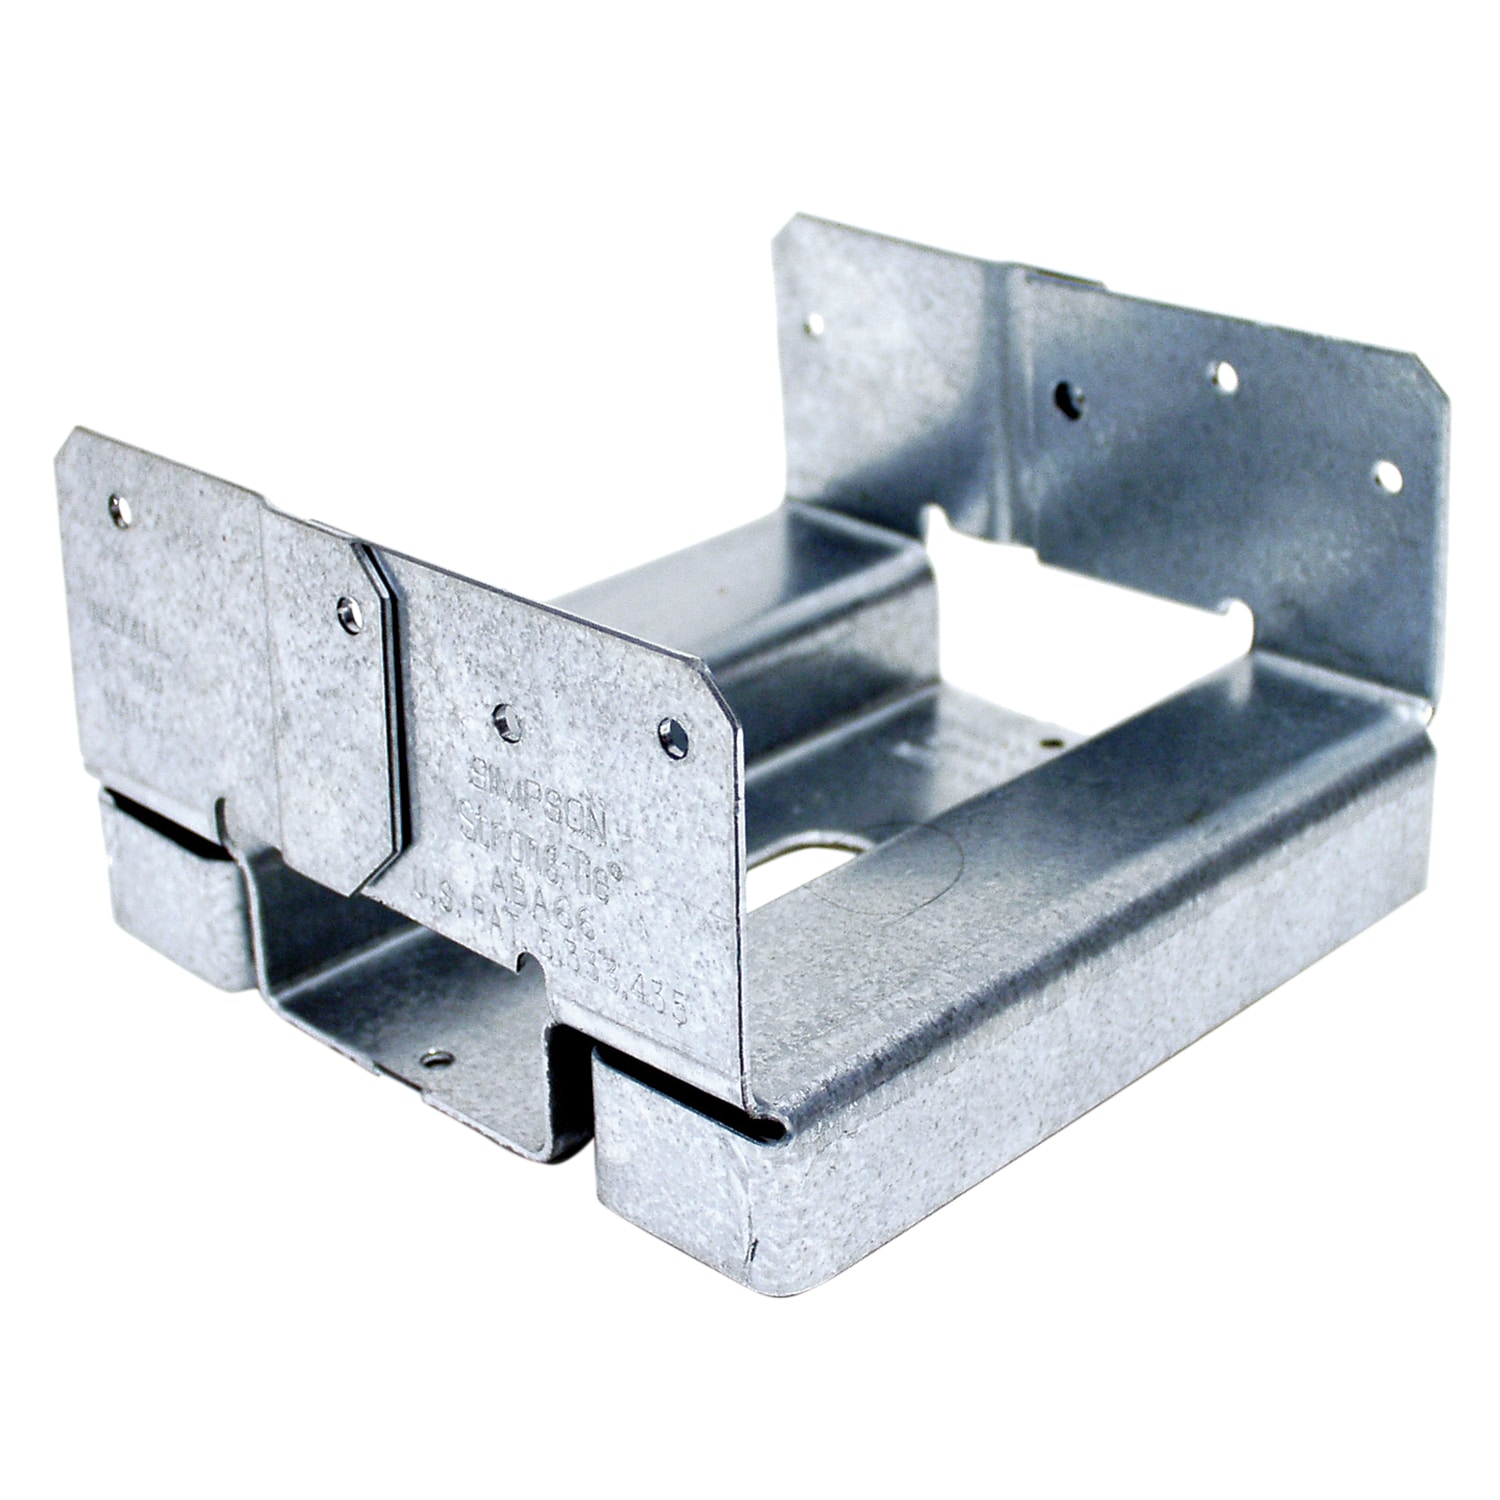 Plastic Plate Adjustable Raised Squared Base Thickening Stand Moisture-Proof Bracket Appliance Base Squared Bracket Base Stainless Steel Pipe 